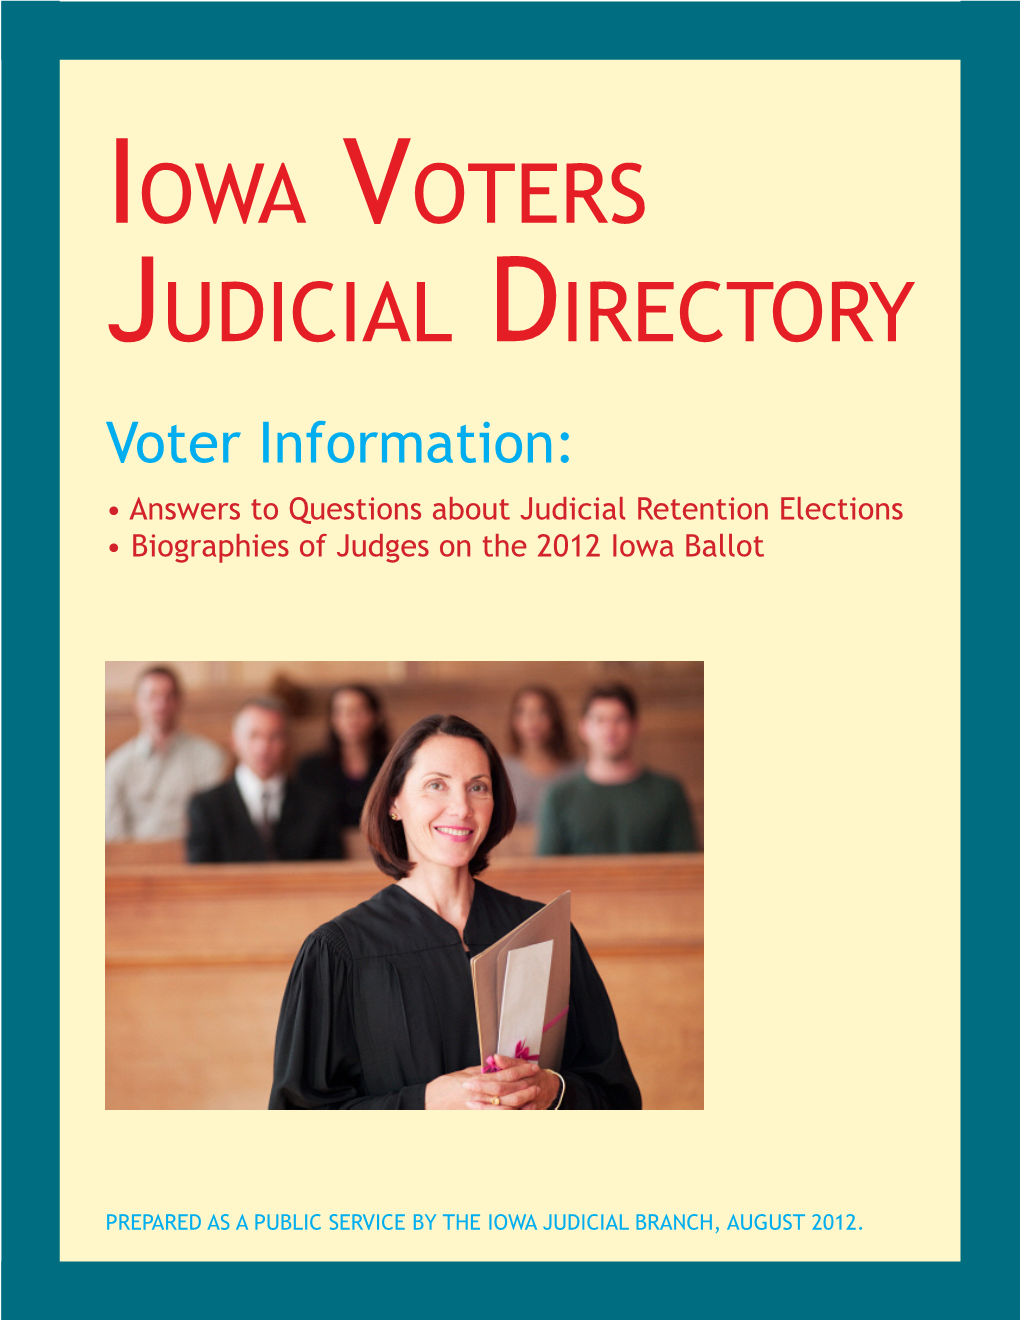 Iowa Voters Judicial Directory Voter Information: • Answers to Questions About Judicial Retention Elections • Biographies of Judges on the 2012 Iowa Ballot